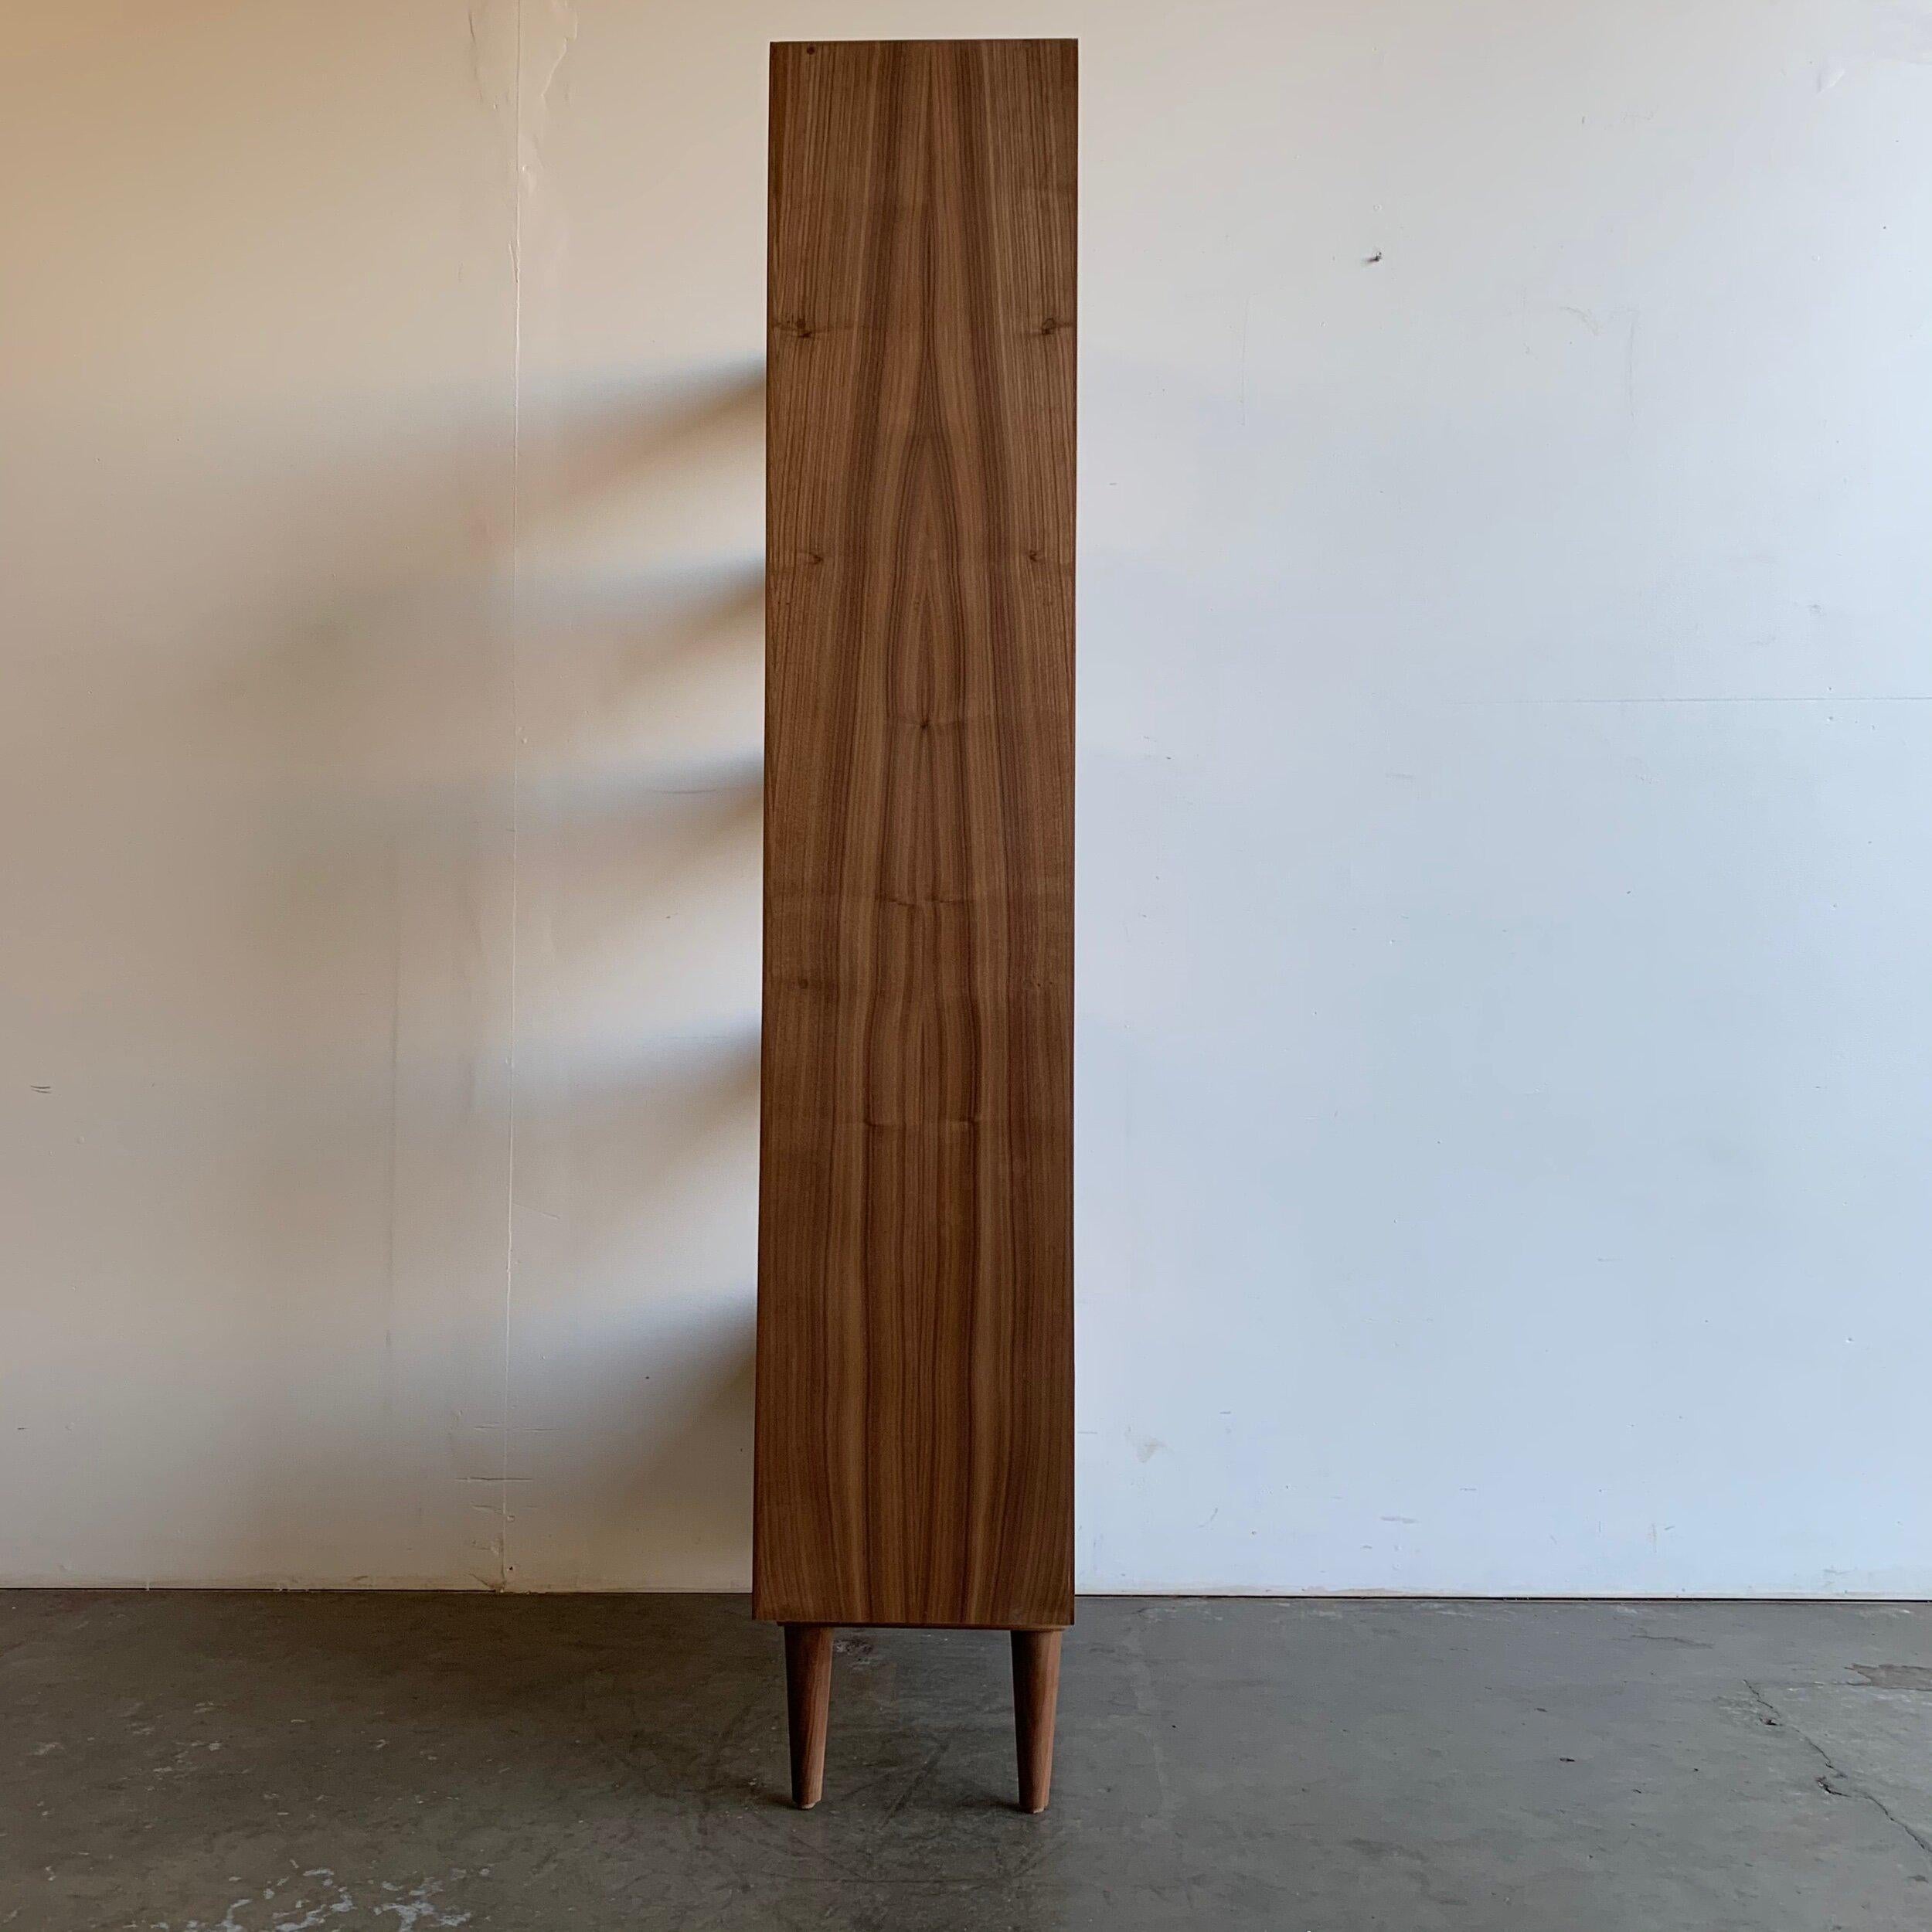 12.25D

32.25W

68.75H

Made of walnut veneer over a solid plywood. They are custom made and only available upon request. There is a 3week to 7week lead time. This can also be made out of solid wood, and other woods such as white oak, birch or oak.